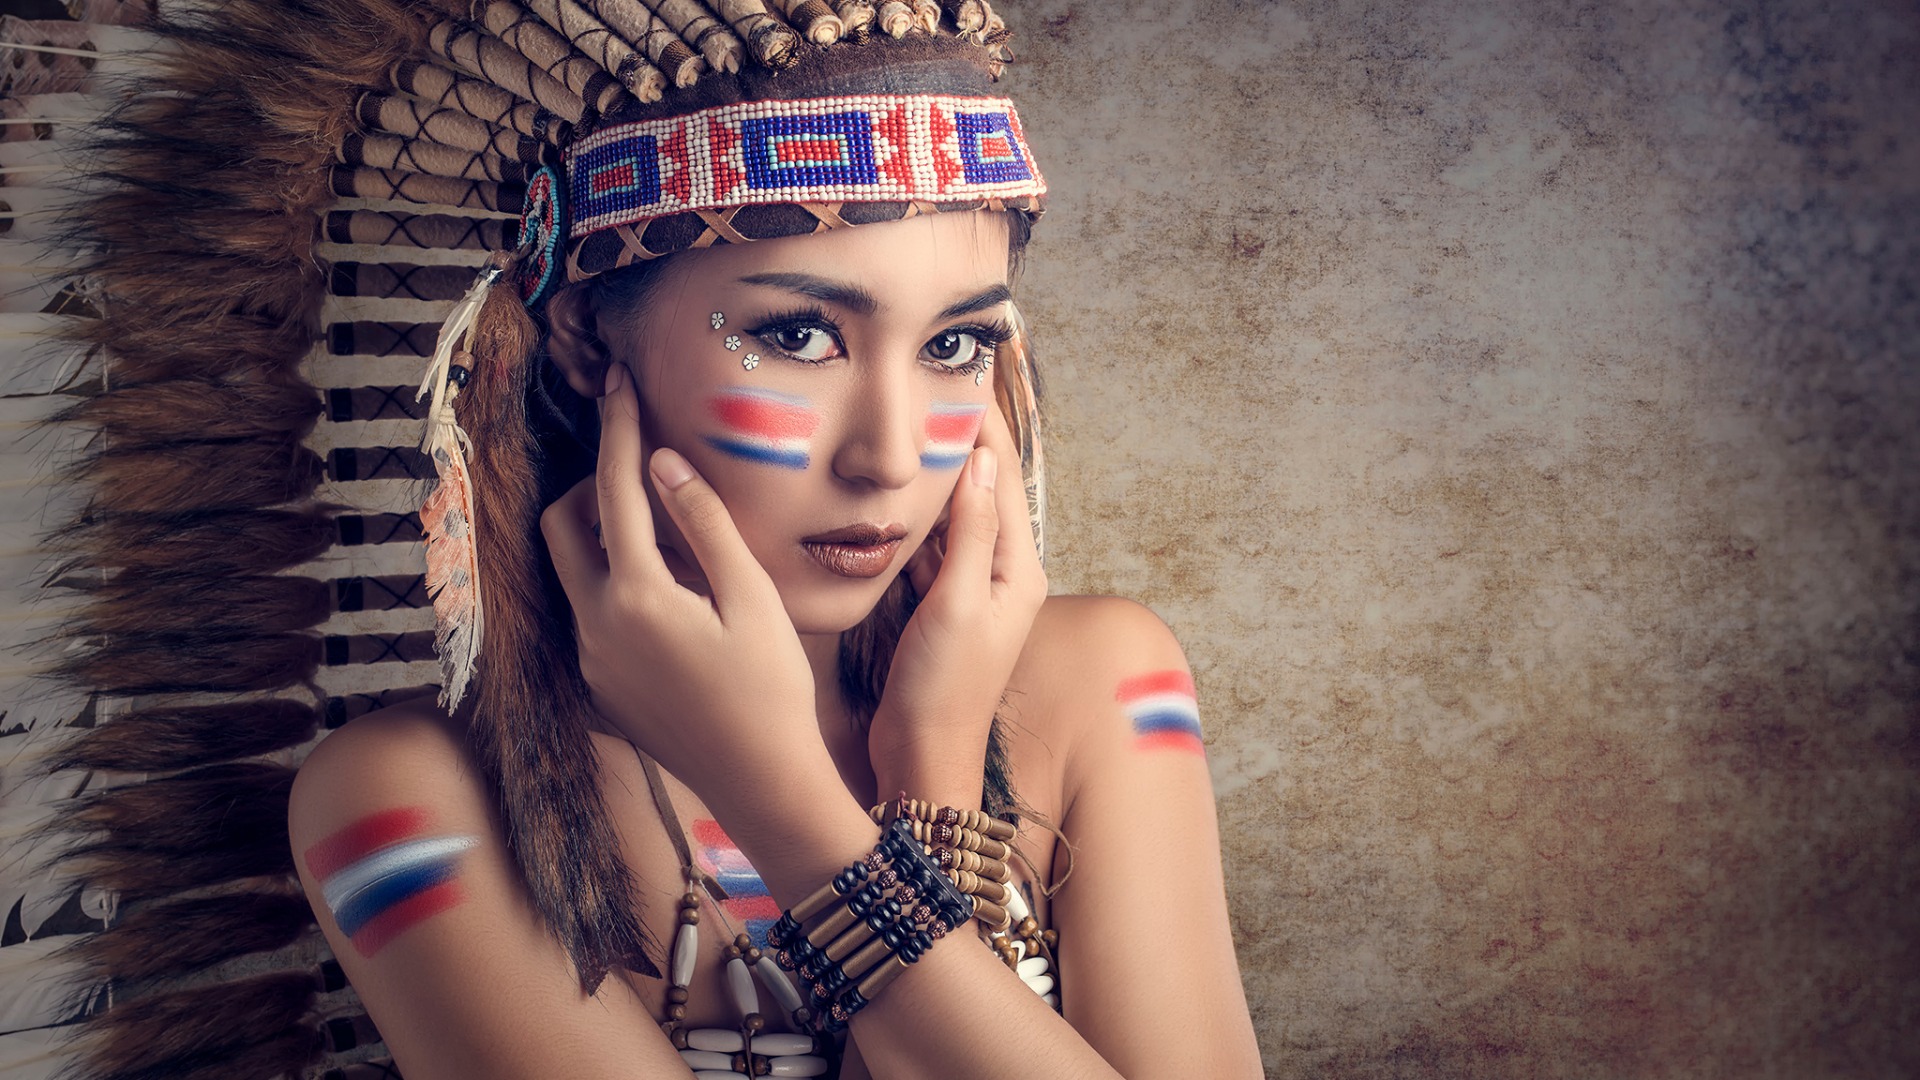 Women Model Photography People Asian Native American Clothing 1920x1080